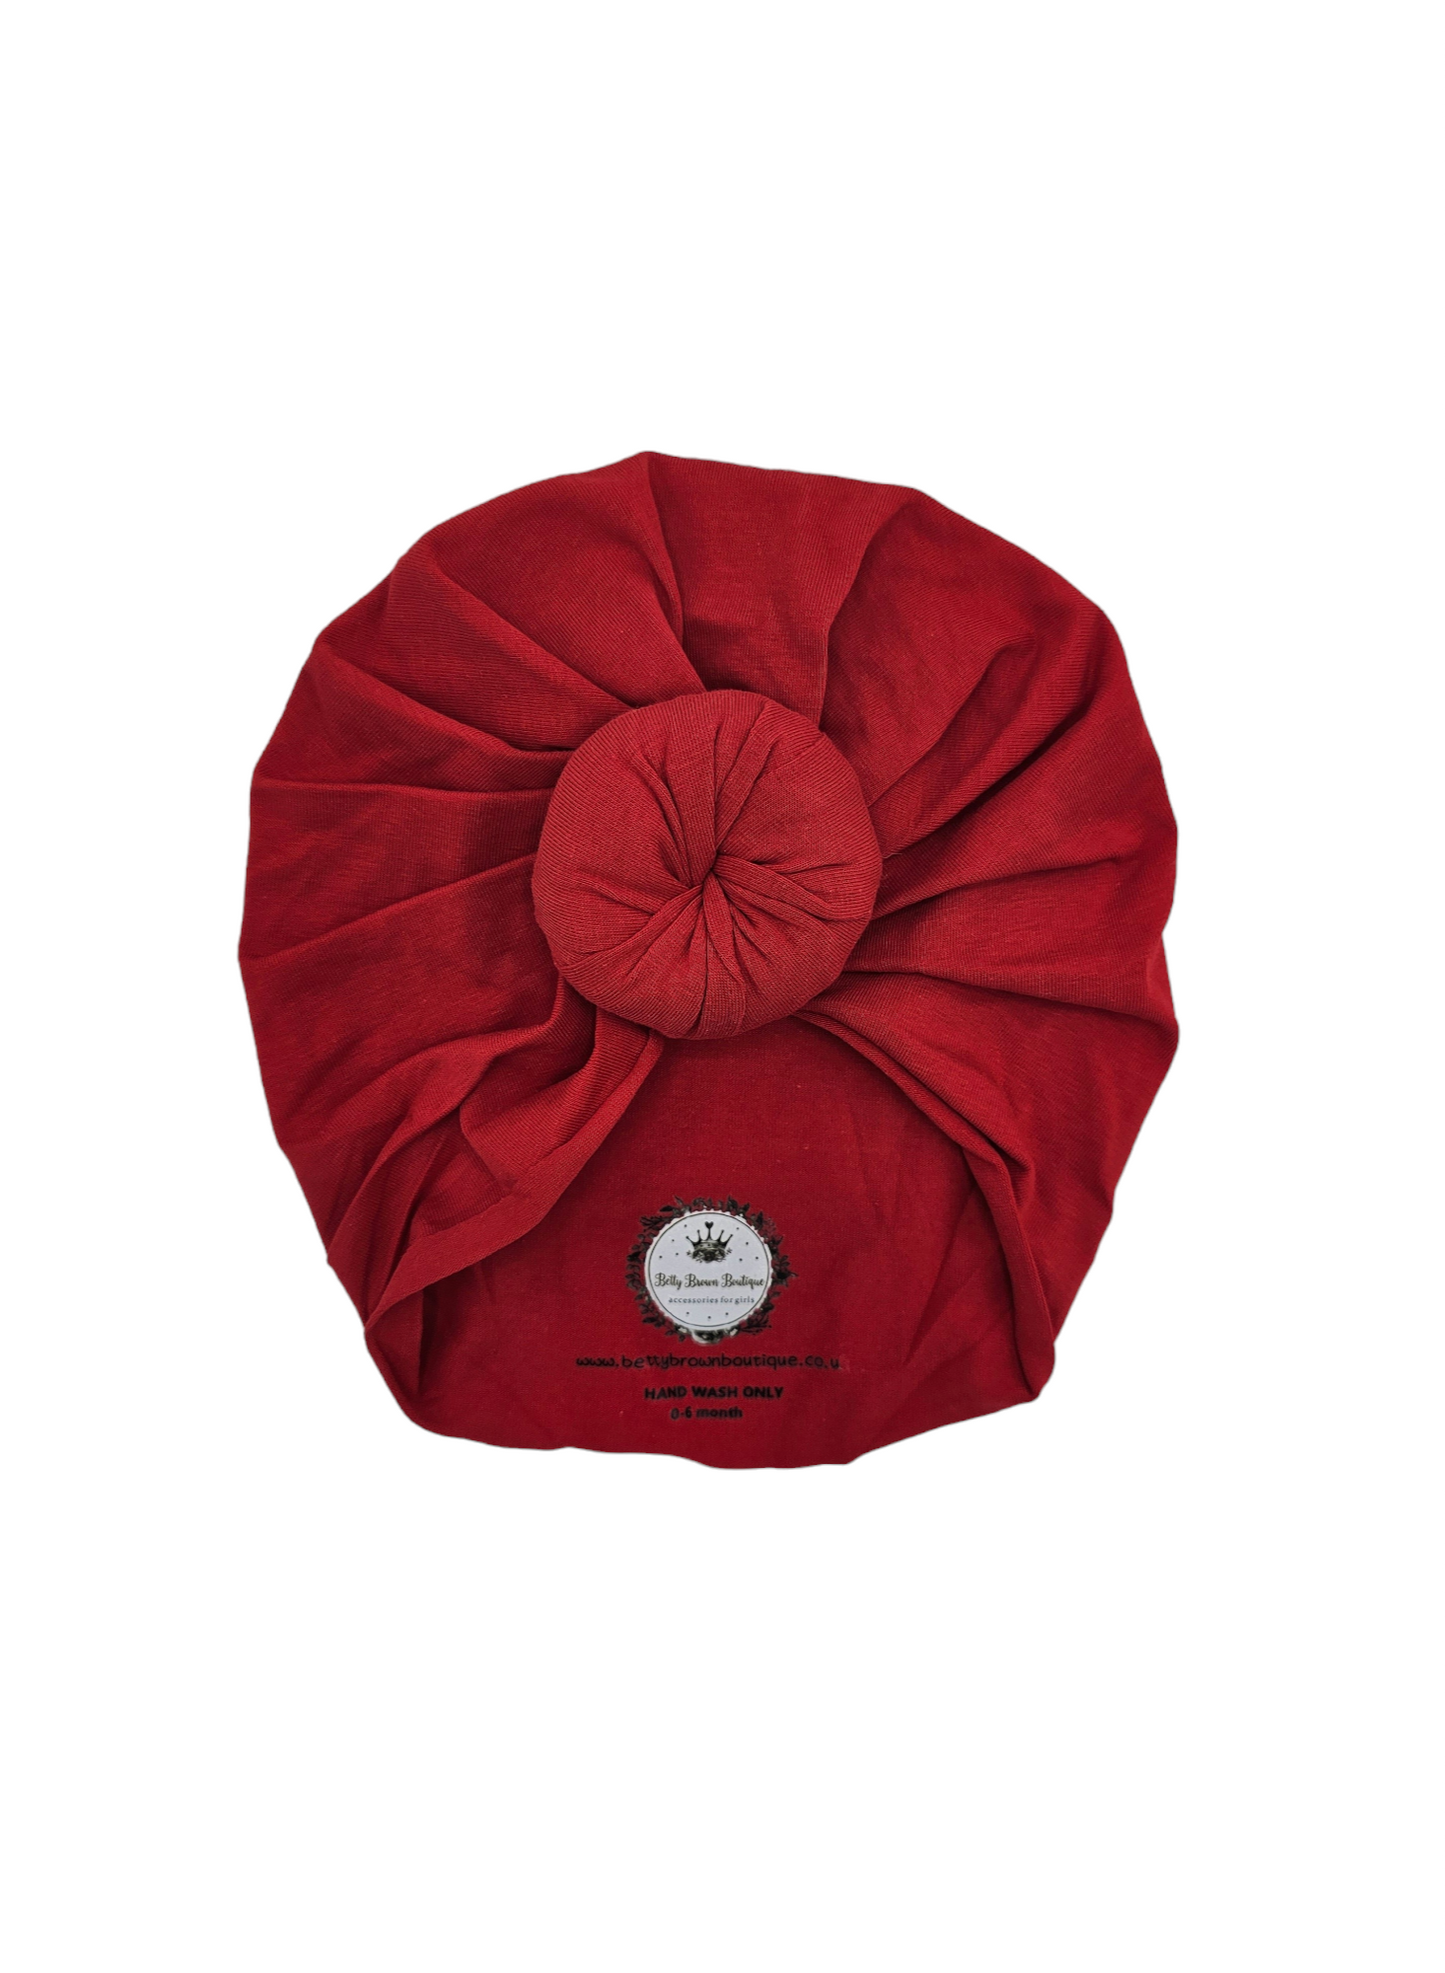 Red Donut Turban Hat - Betty Brown Boutique Ltd